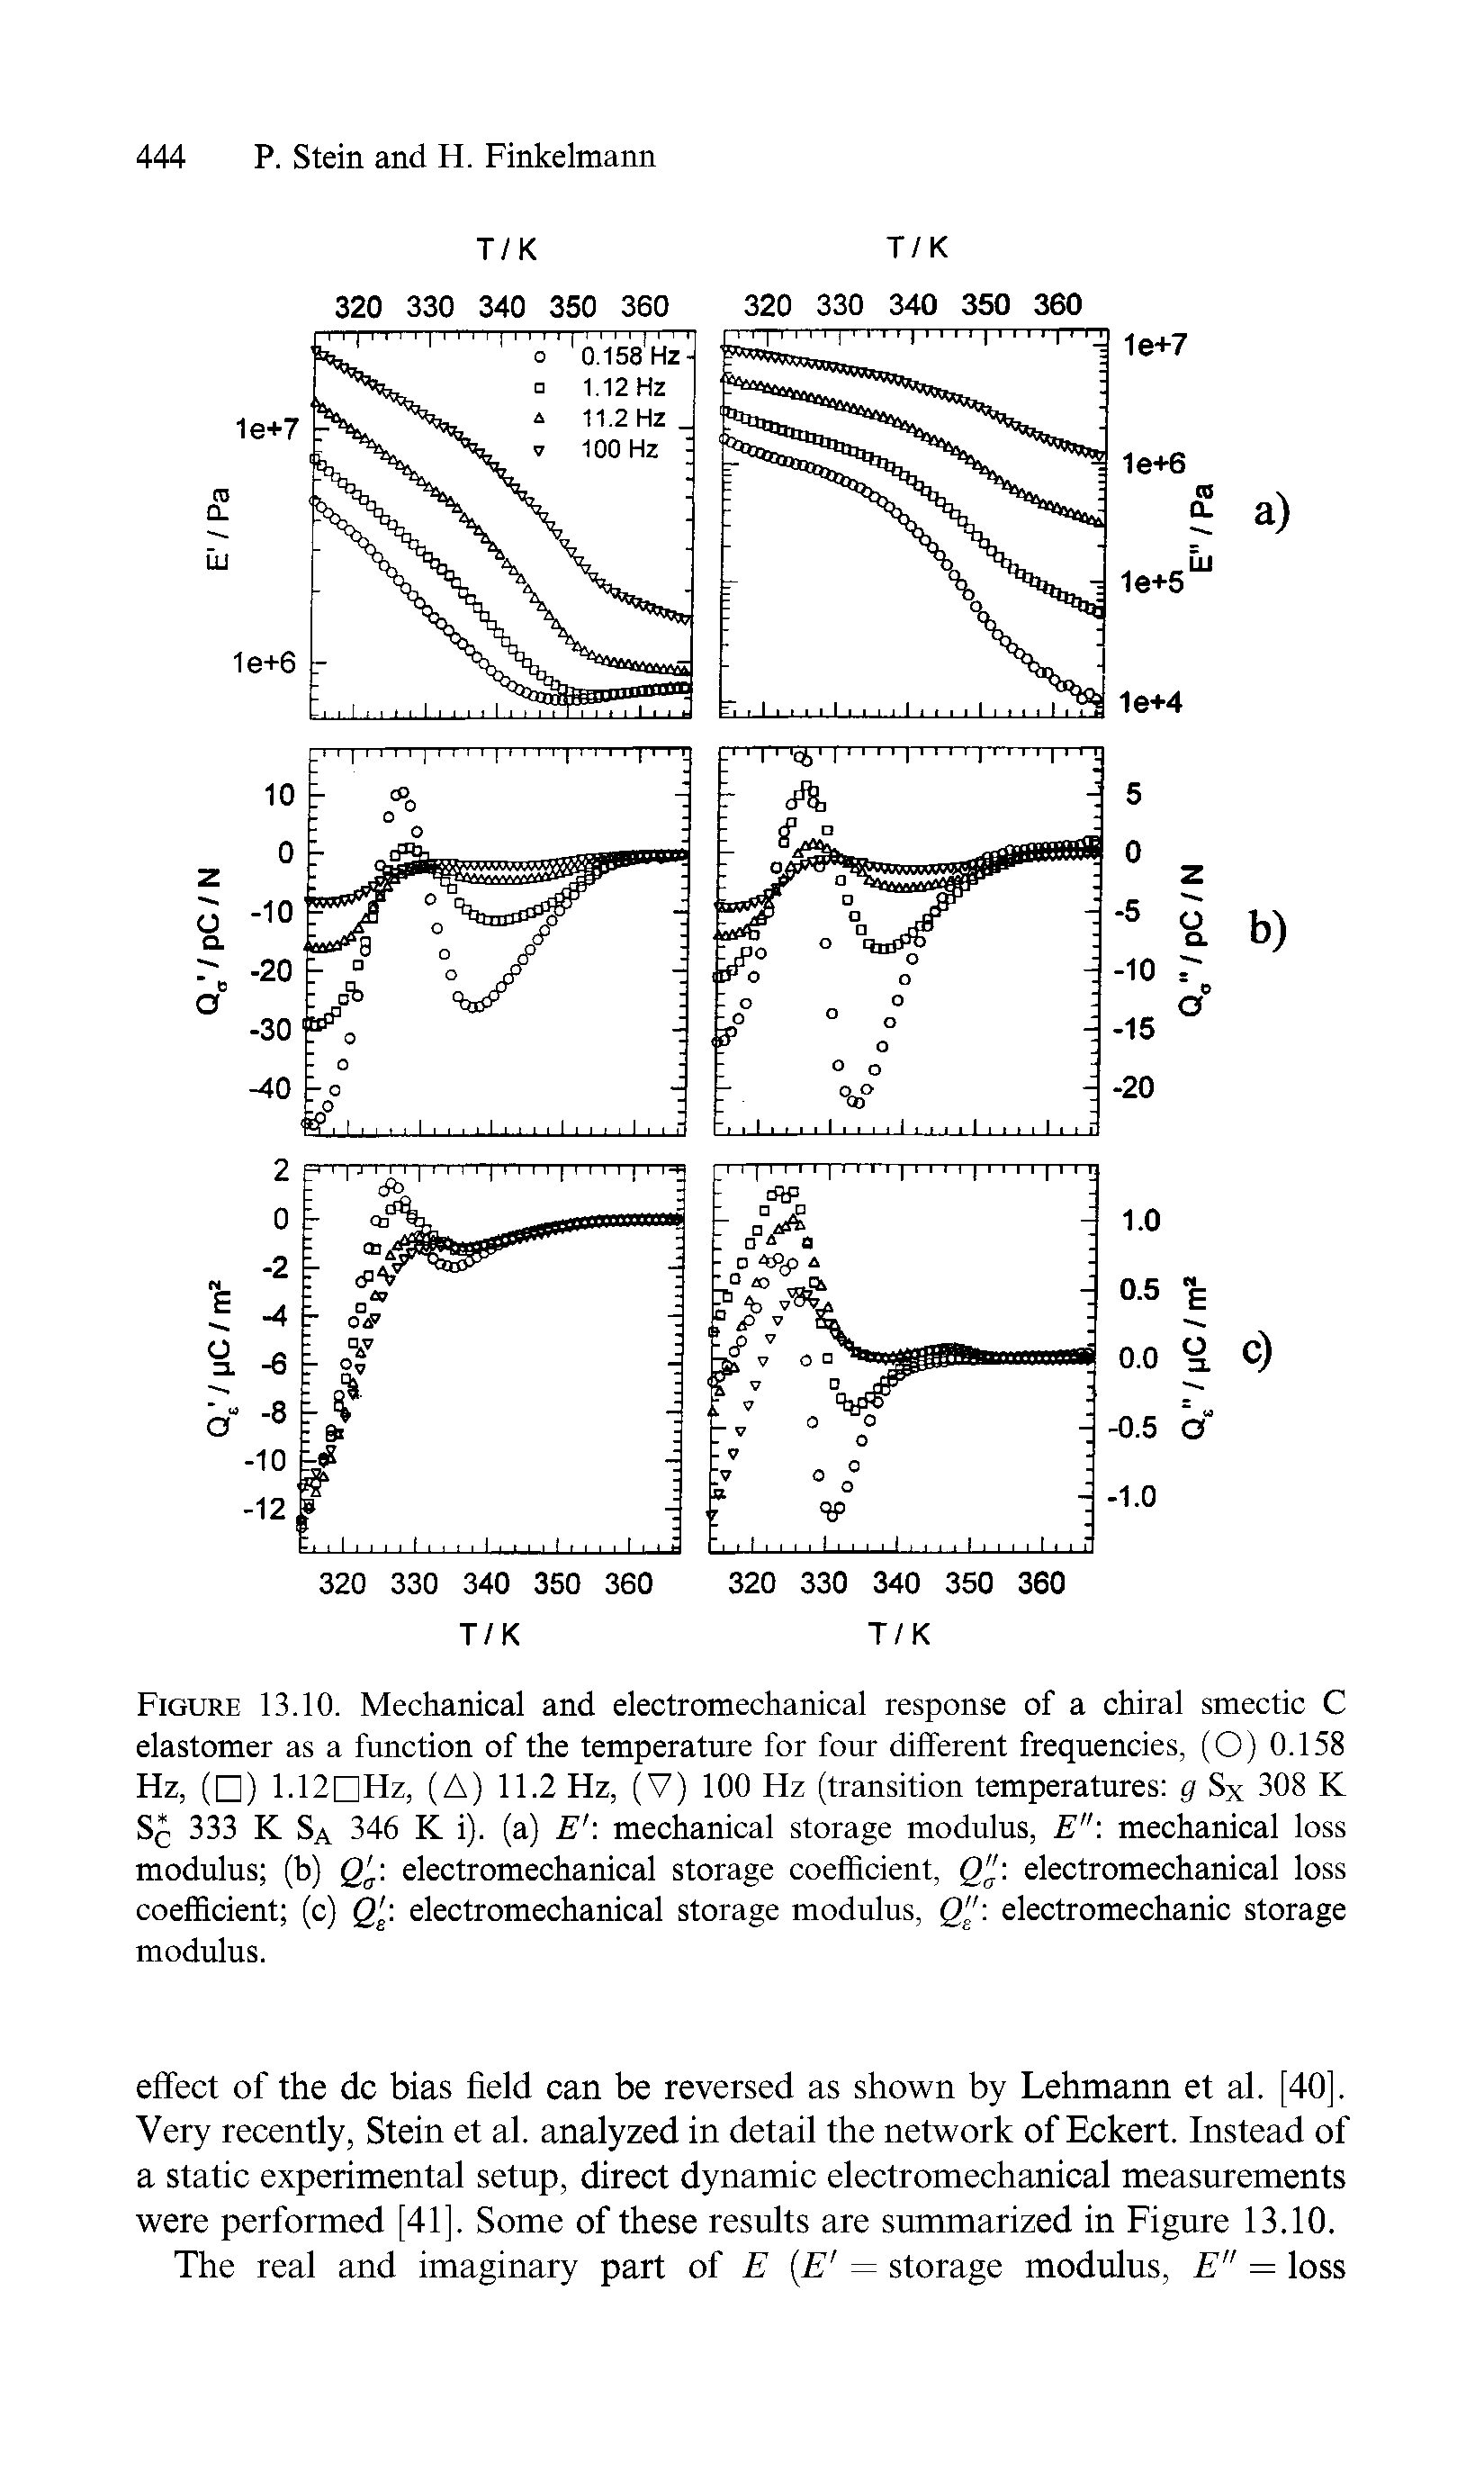 Figure 13.10. Mechanical and electromechanical response of a chiral smectic C elastomer as a function of the temperature for four dilferent frequencies, (O) 0.158 Hz, ( ) 1.12DHz, (A) 11.2 Hz, (V) 100 Hz (transition temperatures g Sx 308 K Sc 333 K Sa 346 K i). (a) E mechanical storage modulus, E" mechanical loss modulus (b) g electromechanical storage coefficient, g" electromechanical loss coefficient (c) g electromechanical storage modulus, g" electromechanic storage modulus.